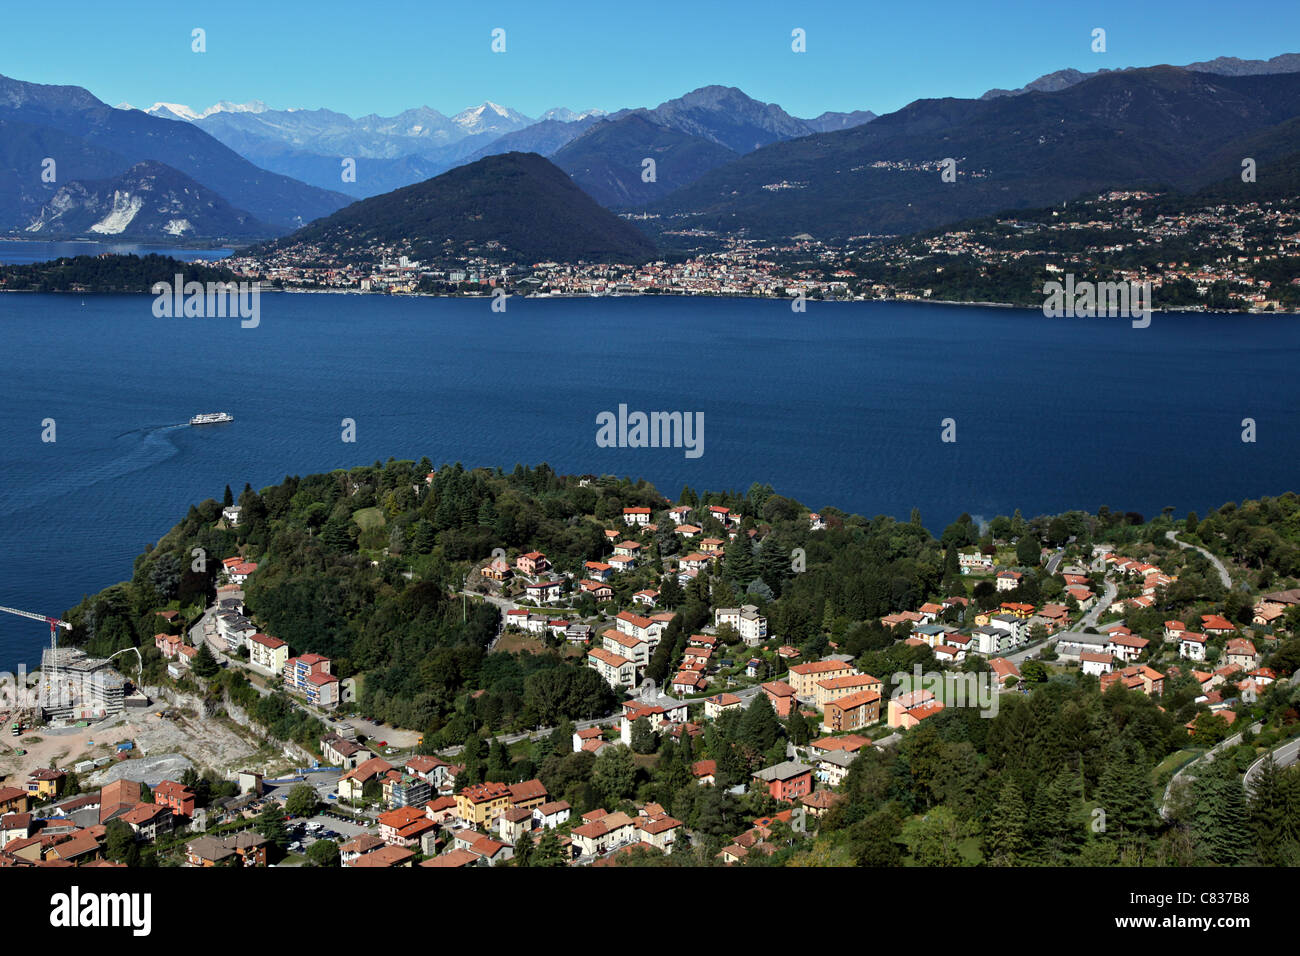 Laveno-Mombello, Lake Maggiore and Verbania on the other side of the lake with the Alps in the background Stock Photo